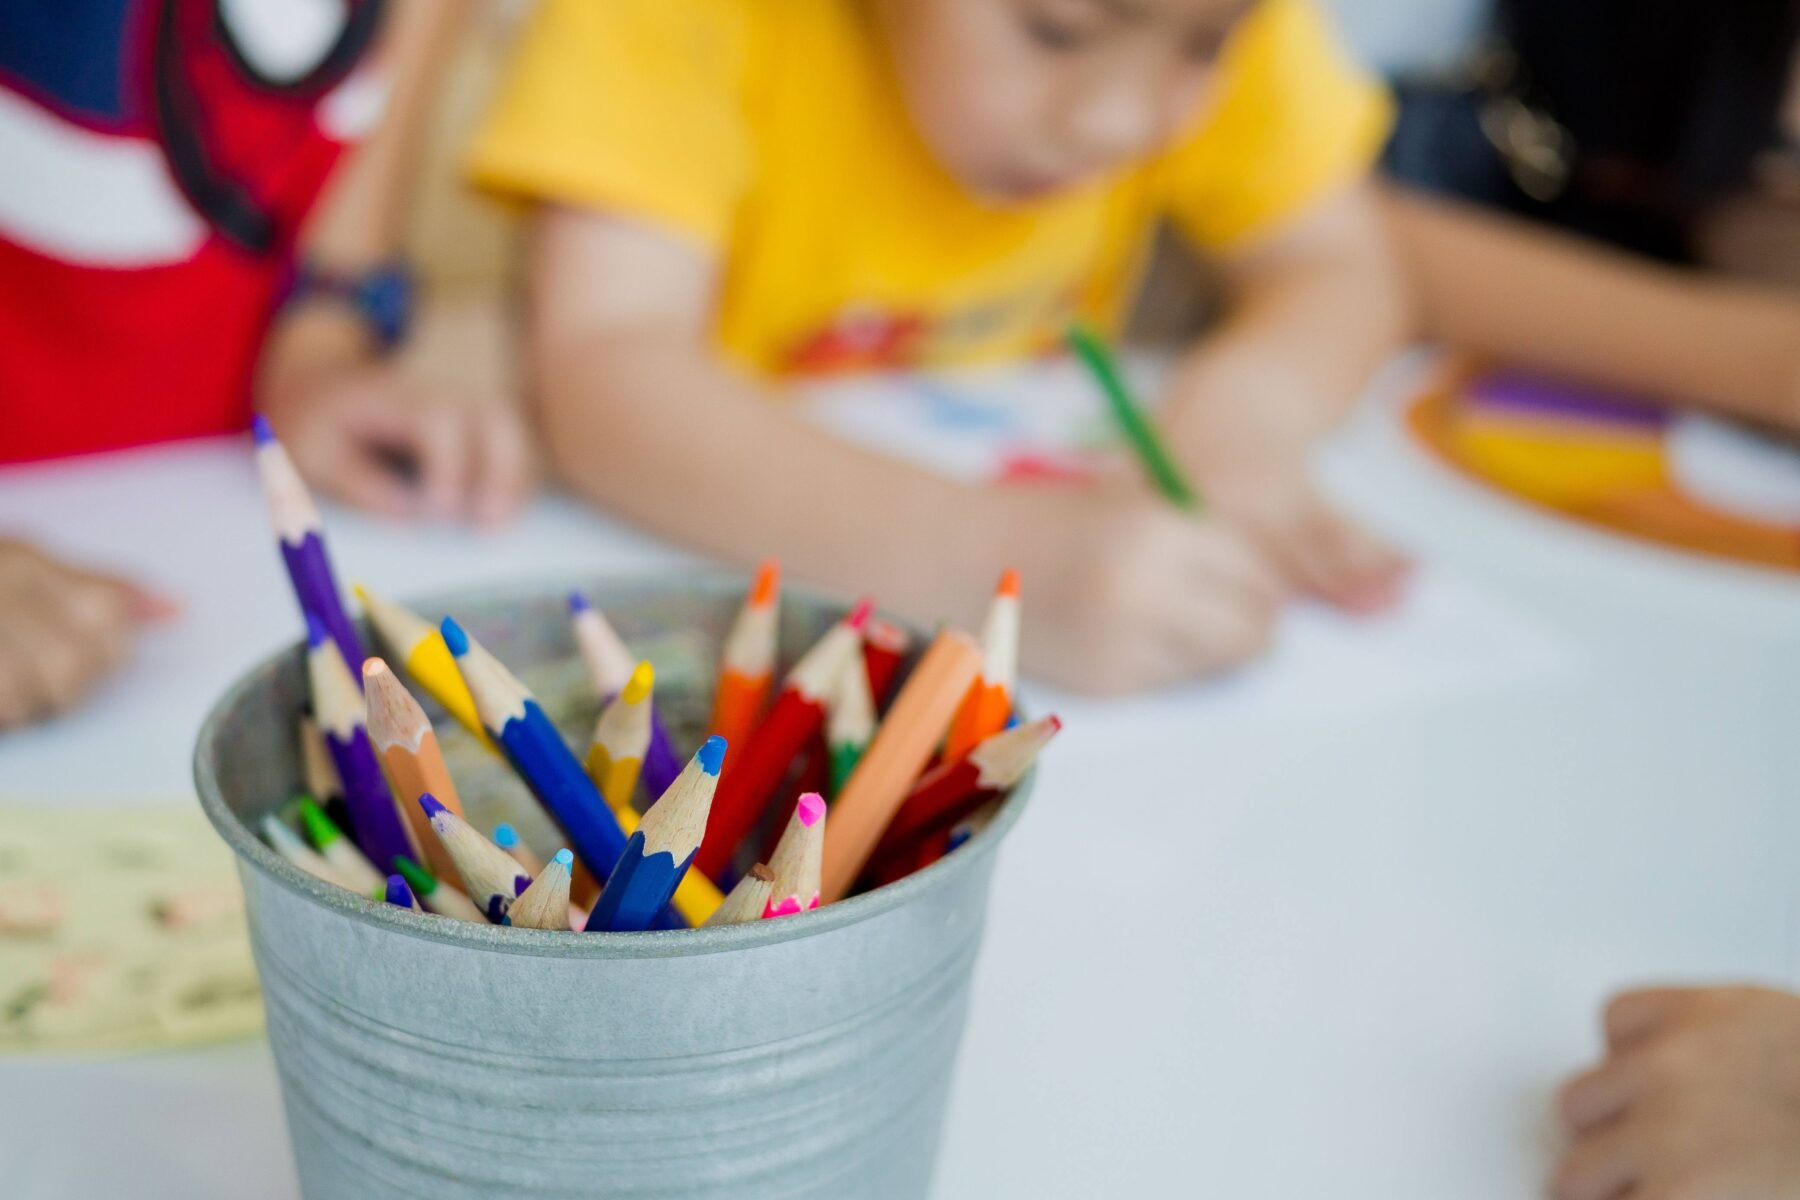 Kids coloring at a table with a bucket of colored pencils